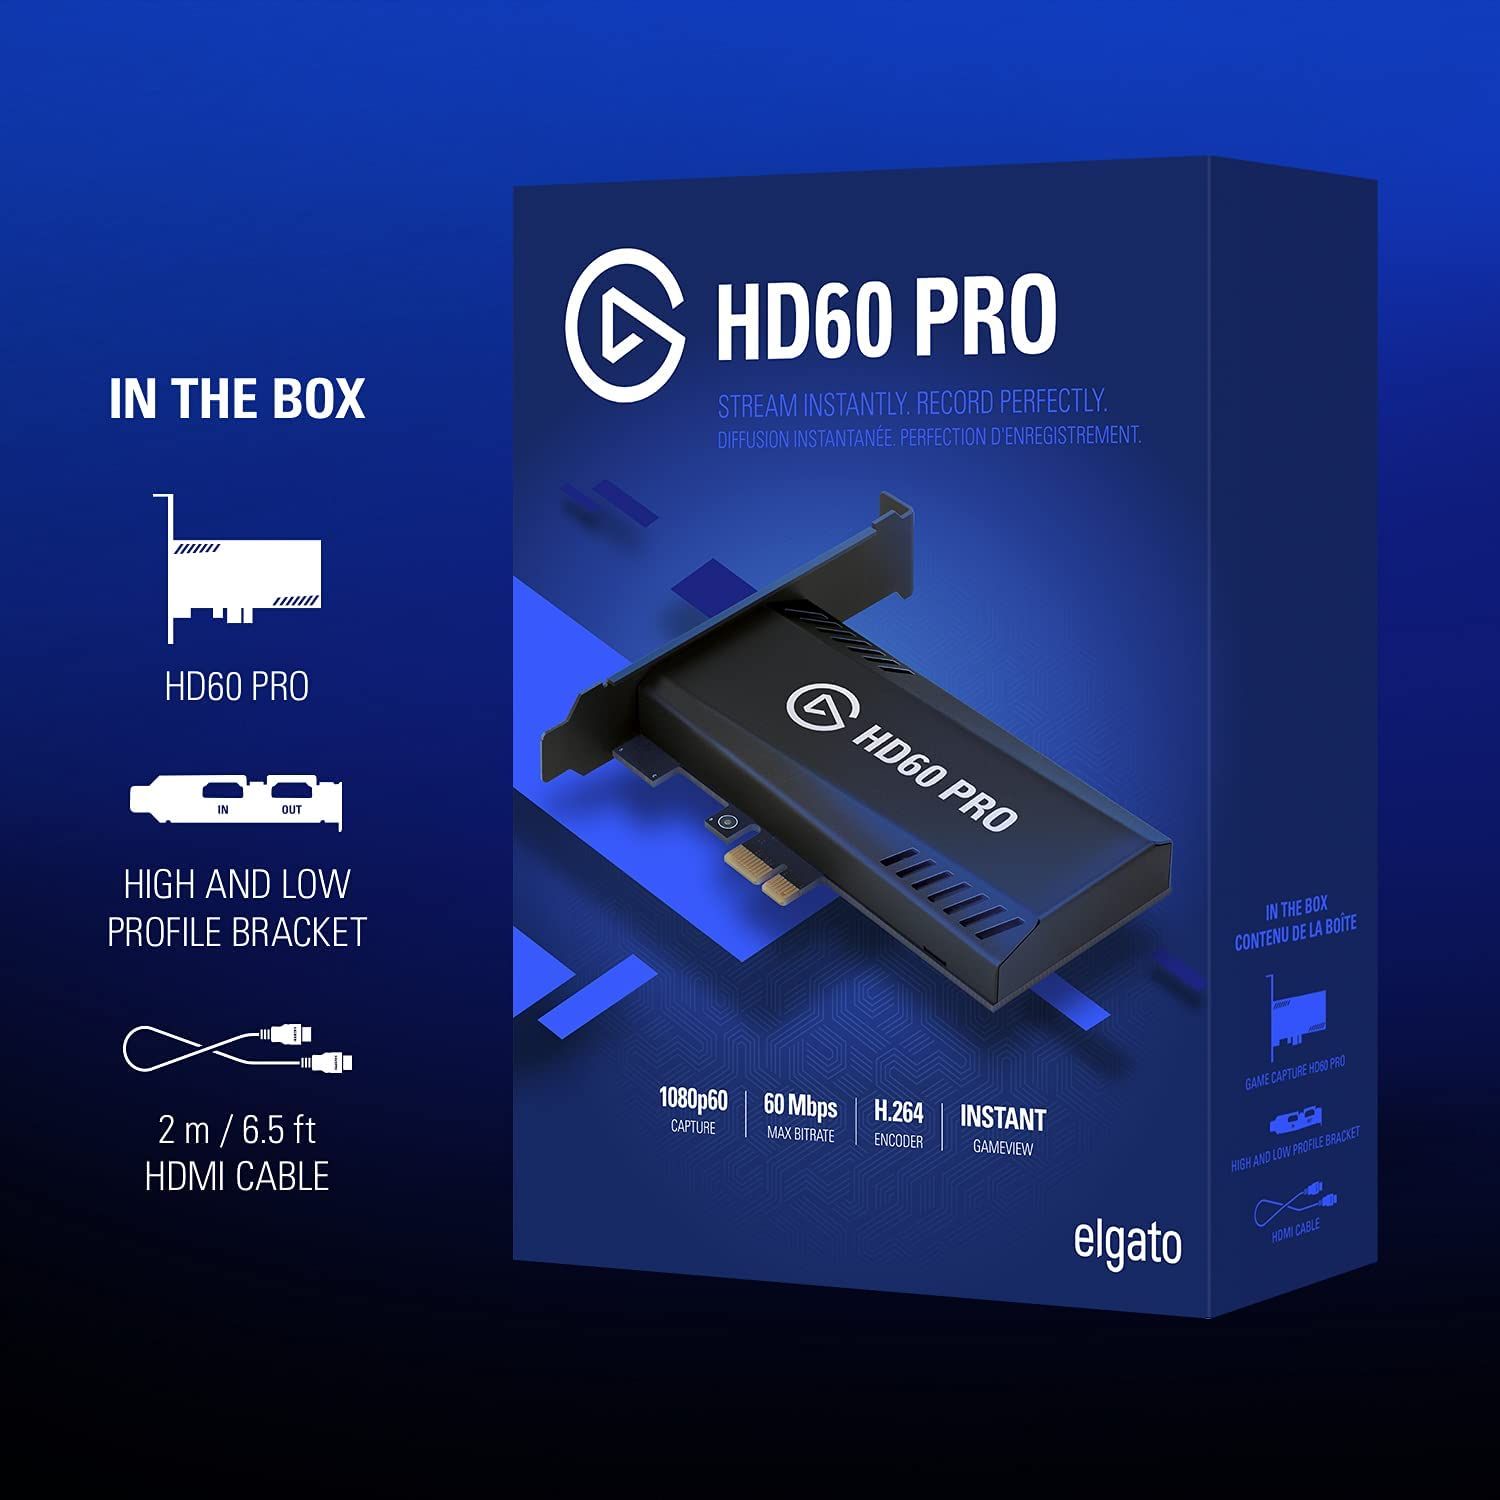 An image showing Elgato HD60 Pro in-box items